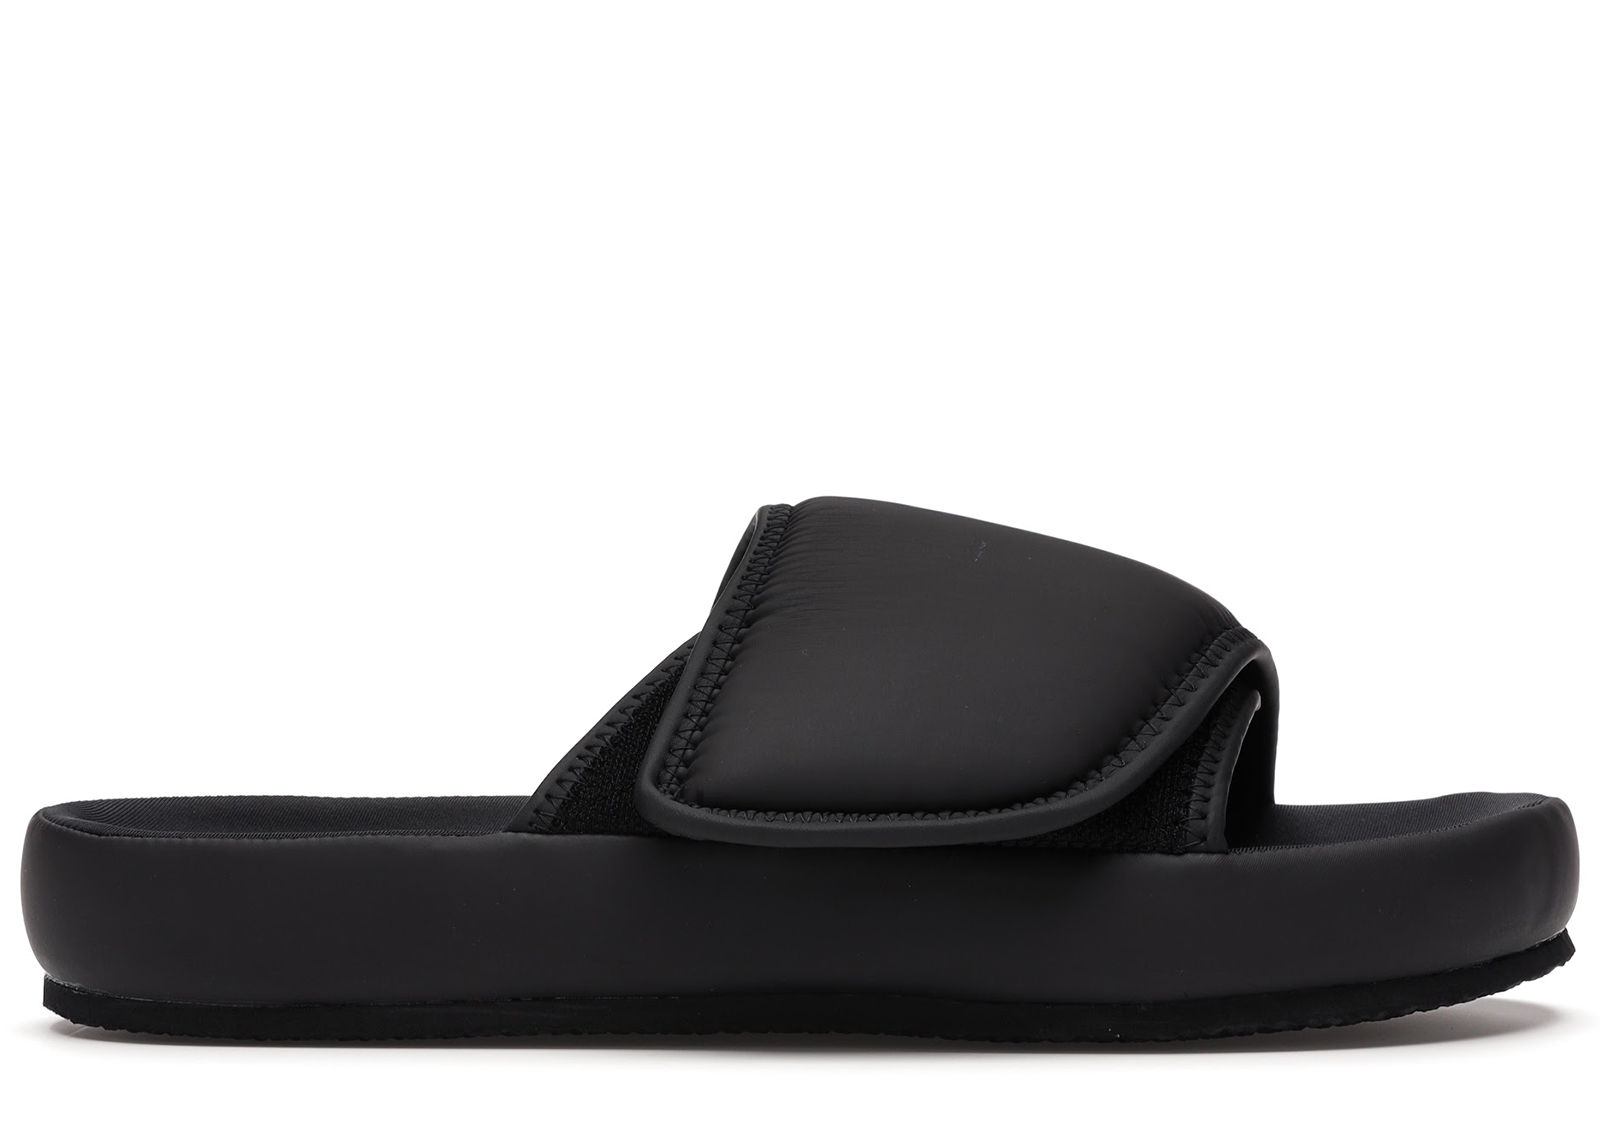 Adidas Yeezy Slide Sandals ☆ | Gallery posted by FujI'Ze SmiLe | Lemon8